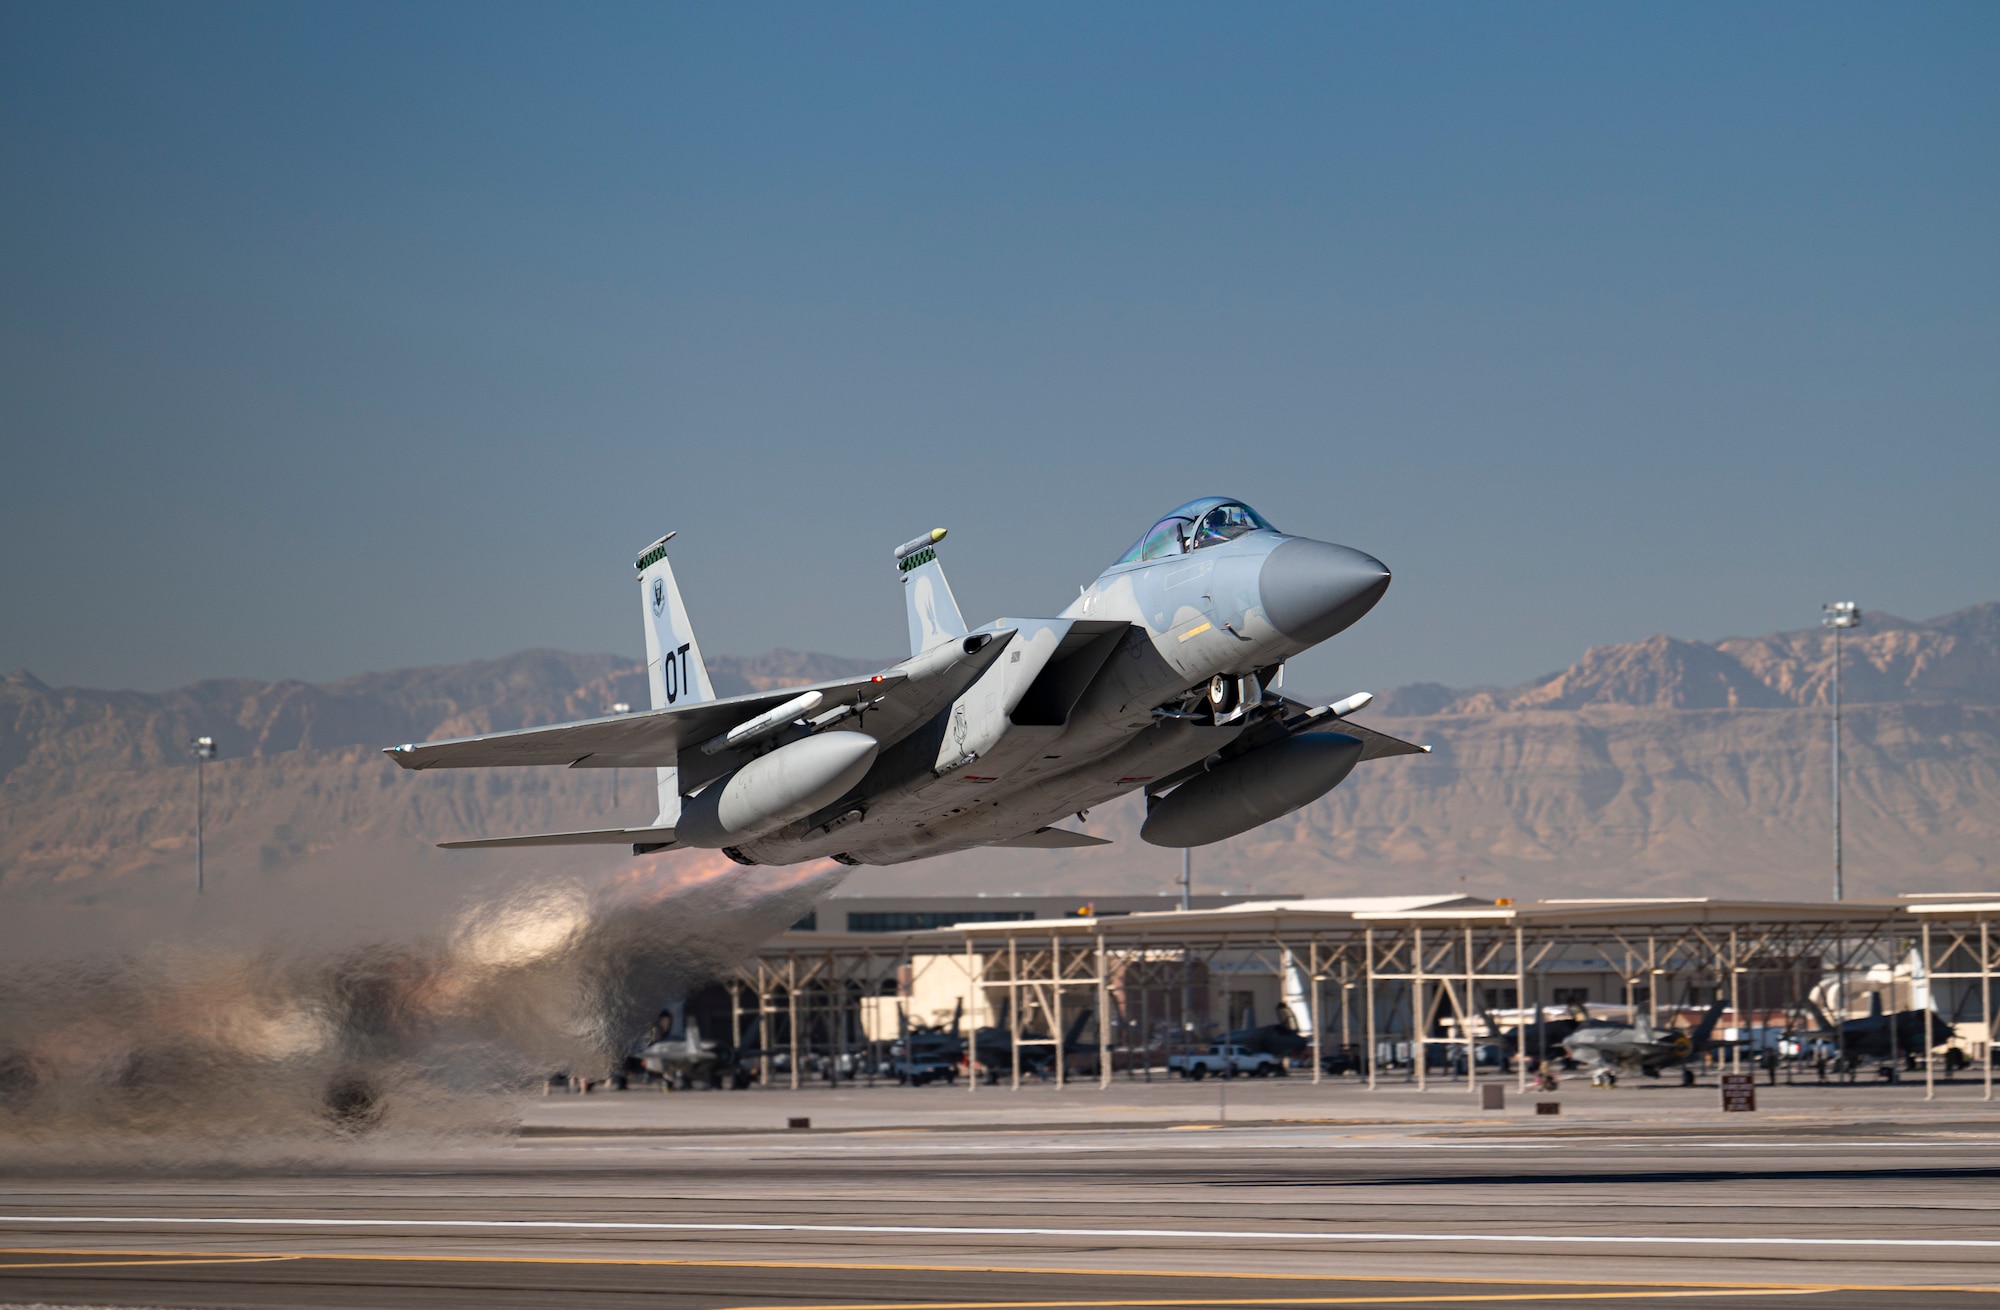 An F-15C Eagle takes off to conduct its final defensive counter air vul during Weapons School Integration 21-B at Nellis Air Force Base, Nev., Dec. 8, 2021. As the Air Force continues to modernize, this class marks the final F-15C Weapons Instructor Course to be taught at the United States Air Force Weapons School.